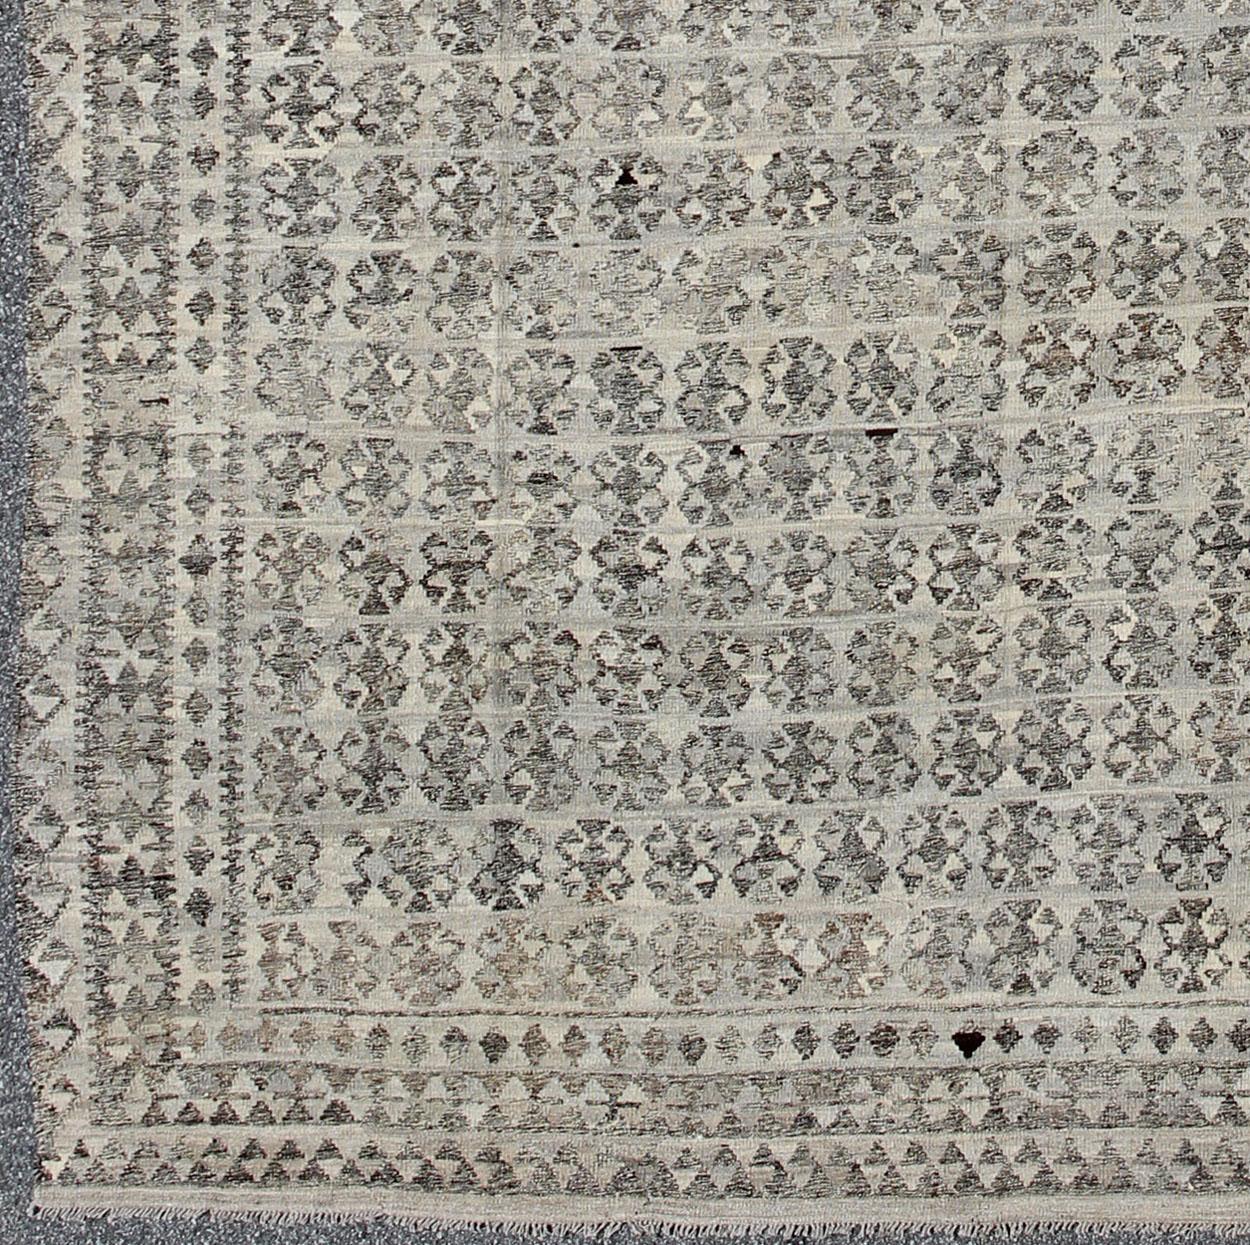 Afghan Large Kilim Rug in Shades of Gray, Silver, Silver Blue and Charcoal For Sale